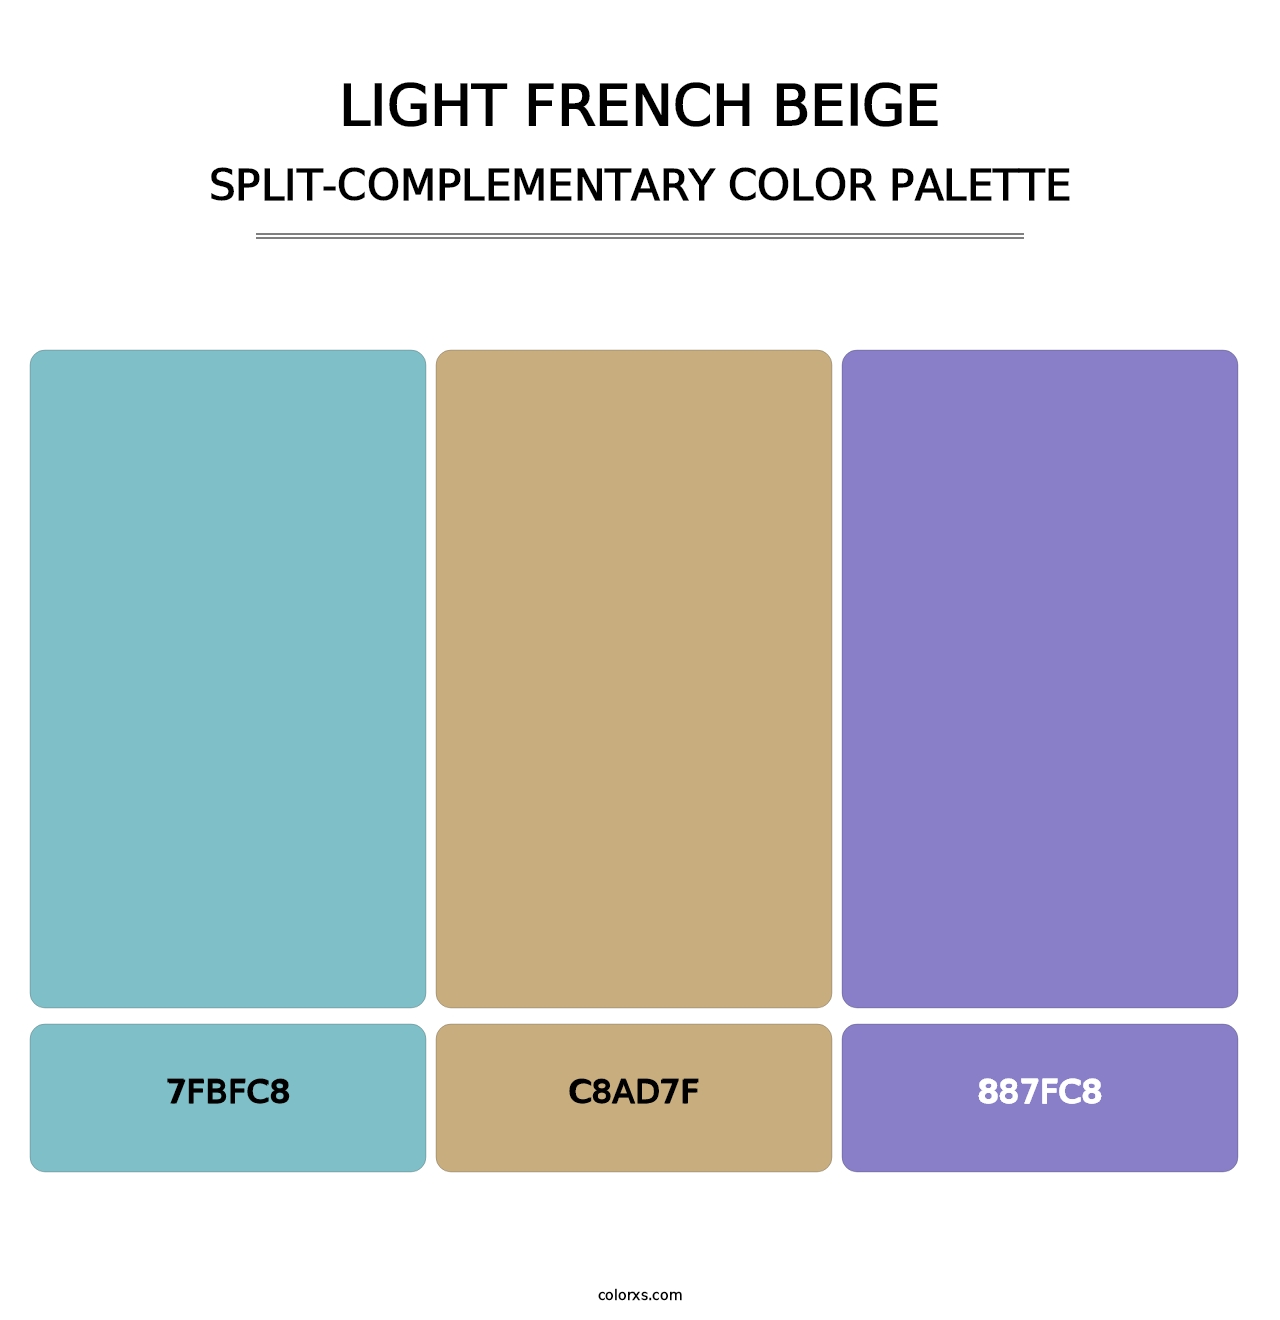 Light French Beige - Split-Complementary Color Palette